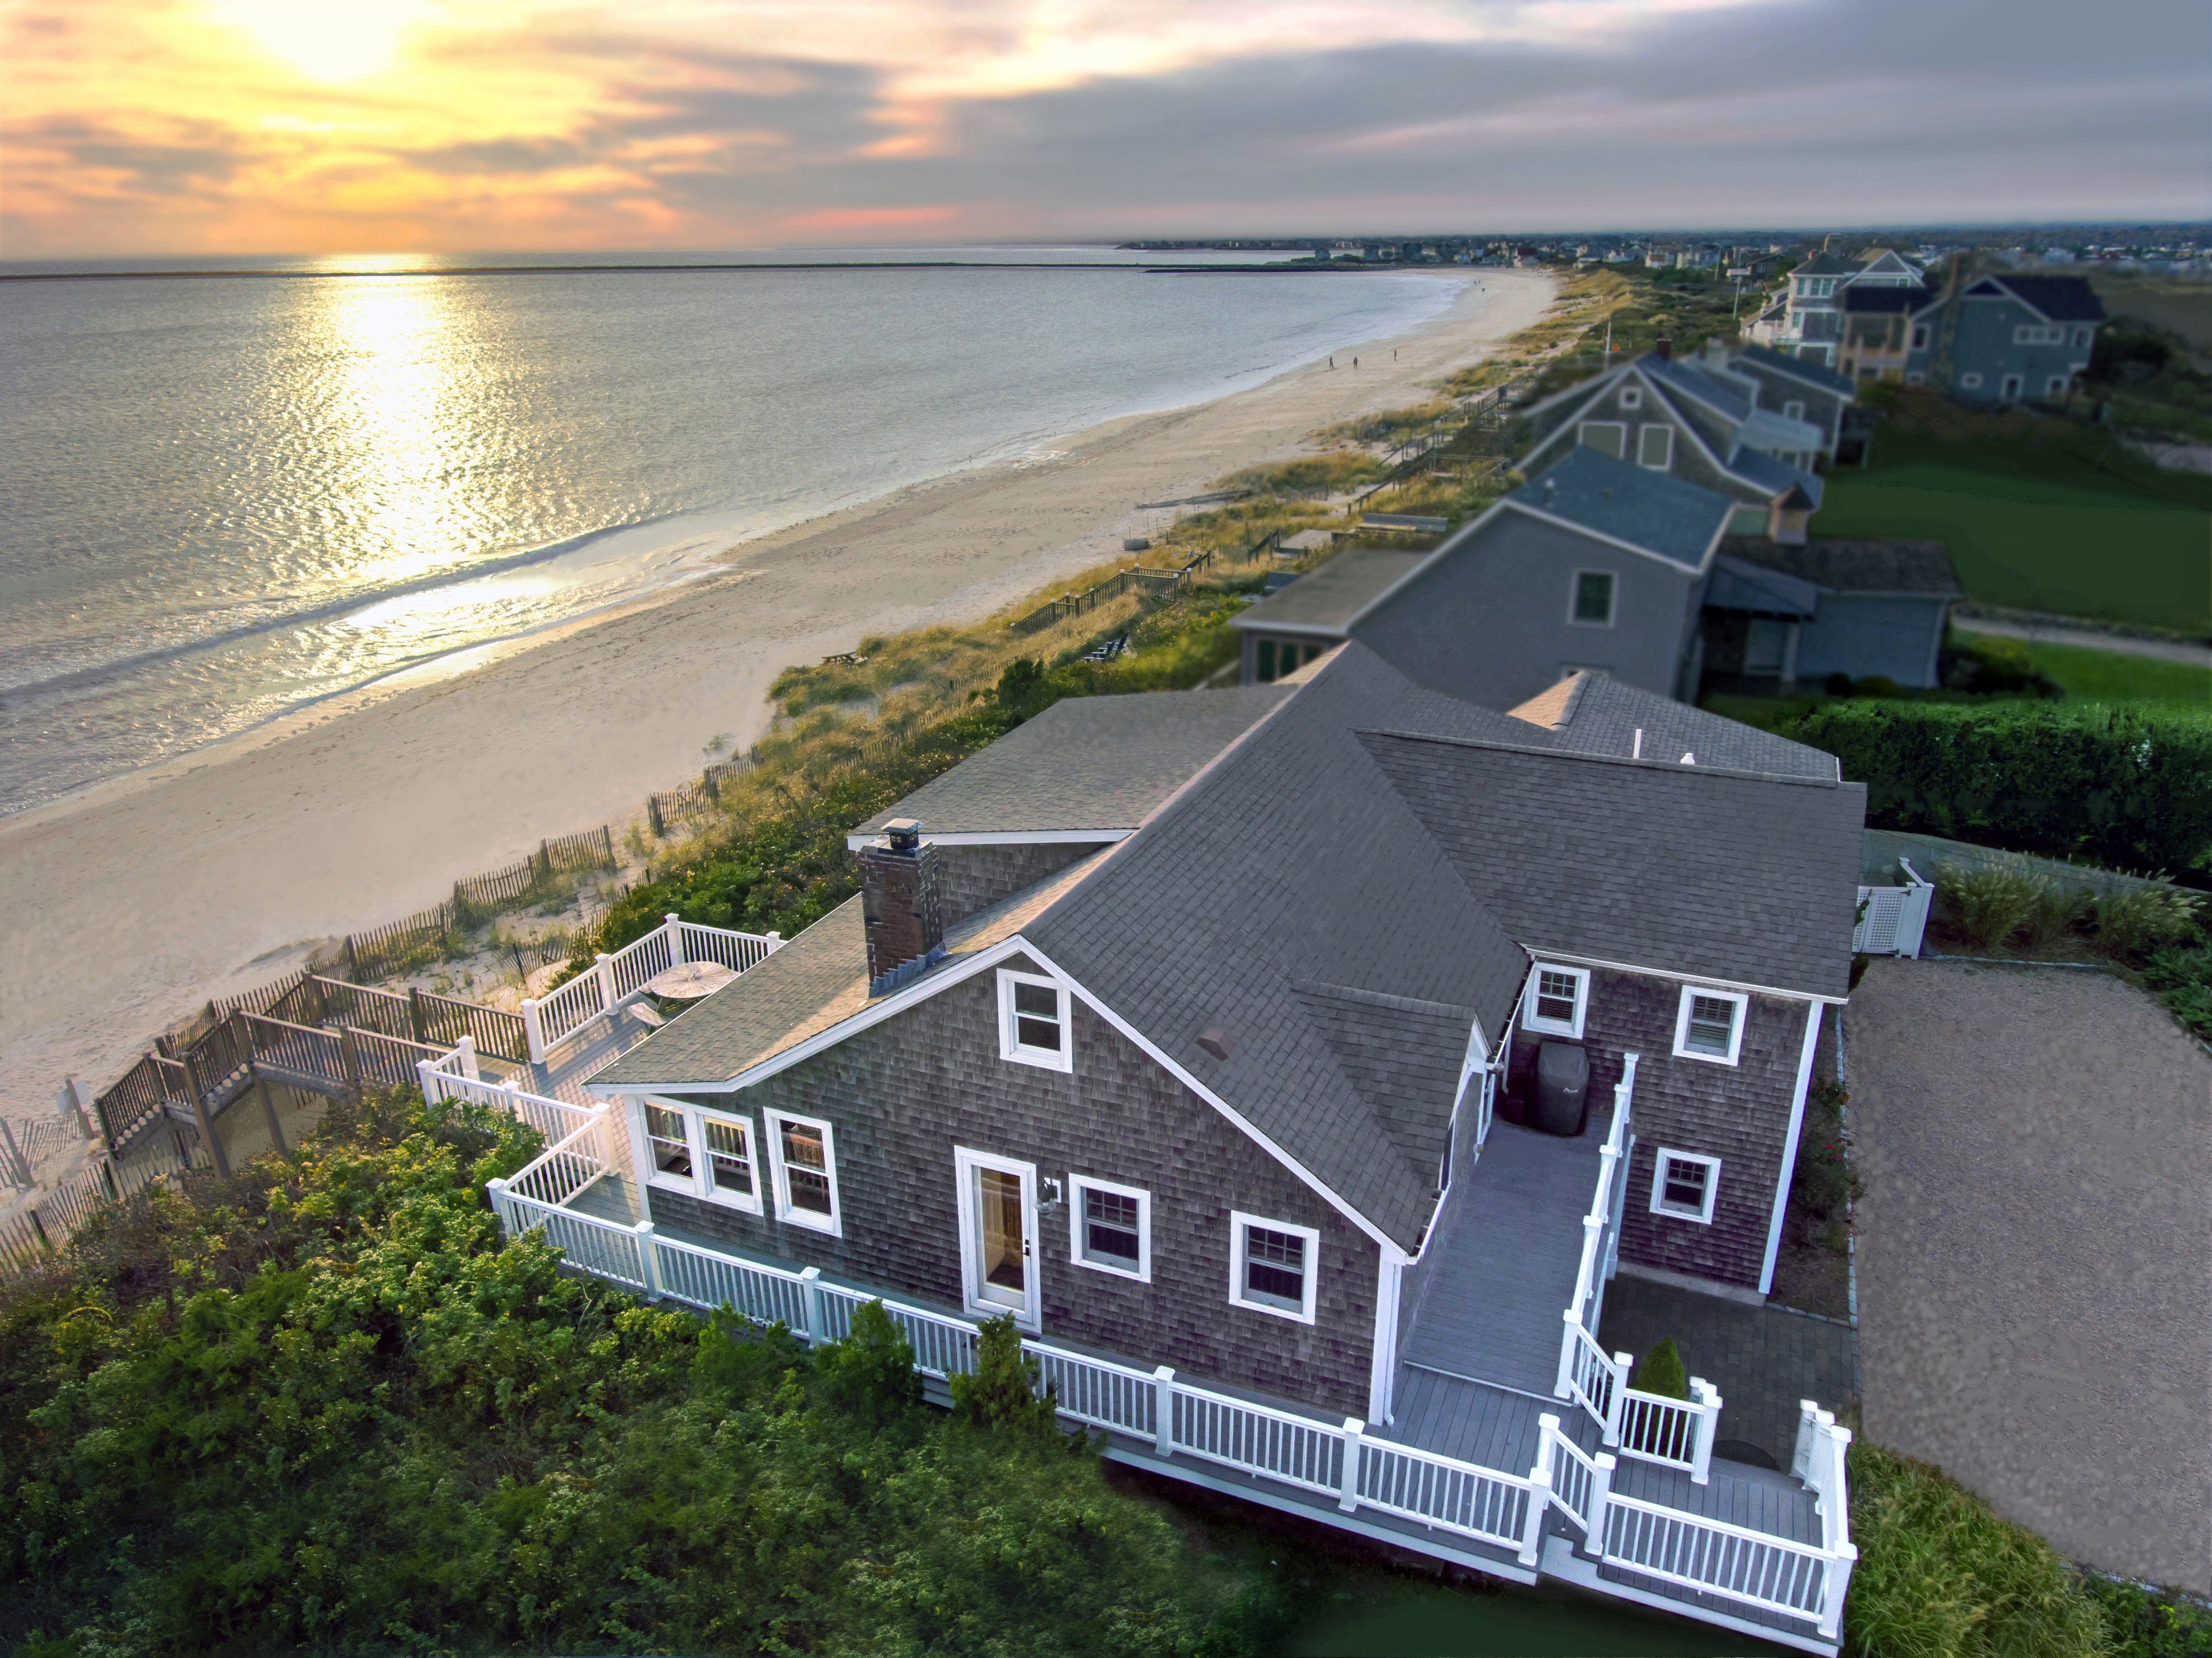 Beachfront Home on Sand Hill Cove Sells for $2.1M